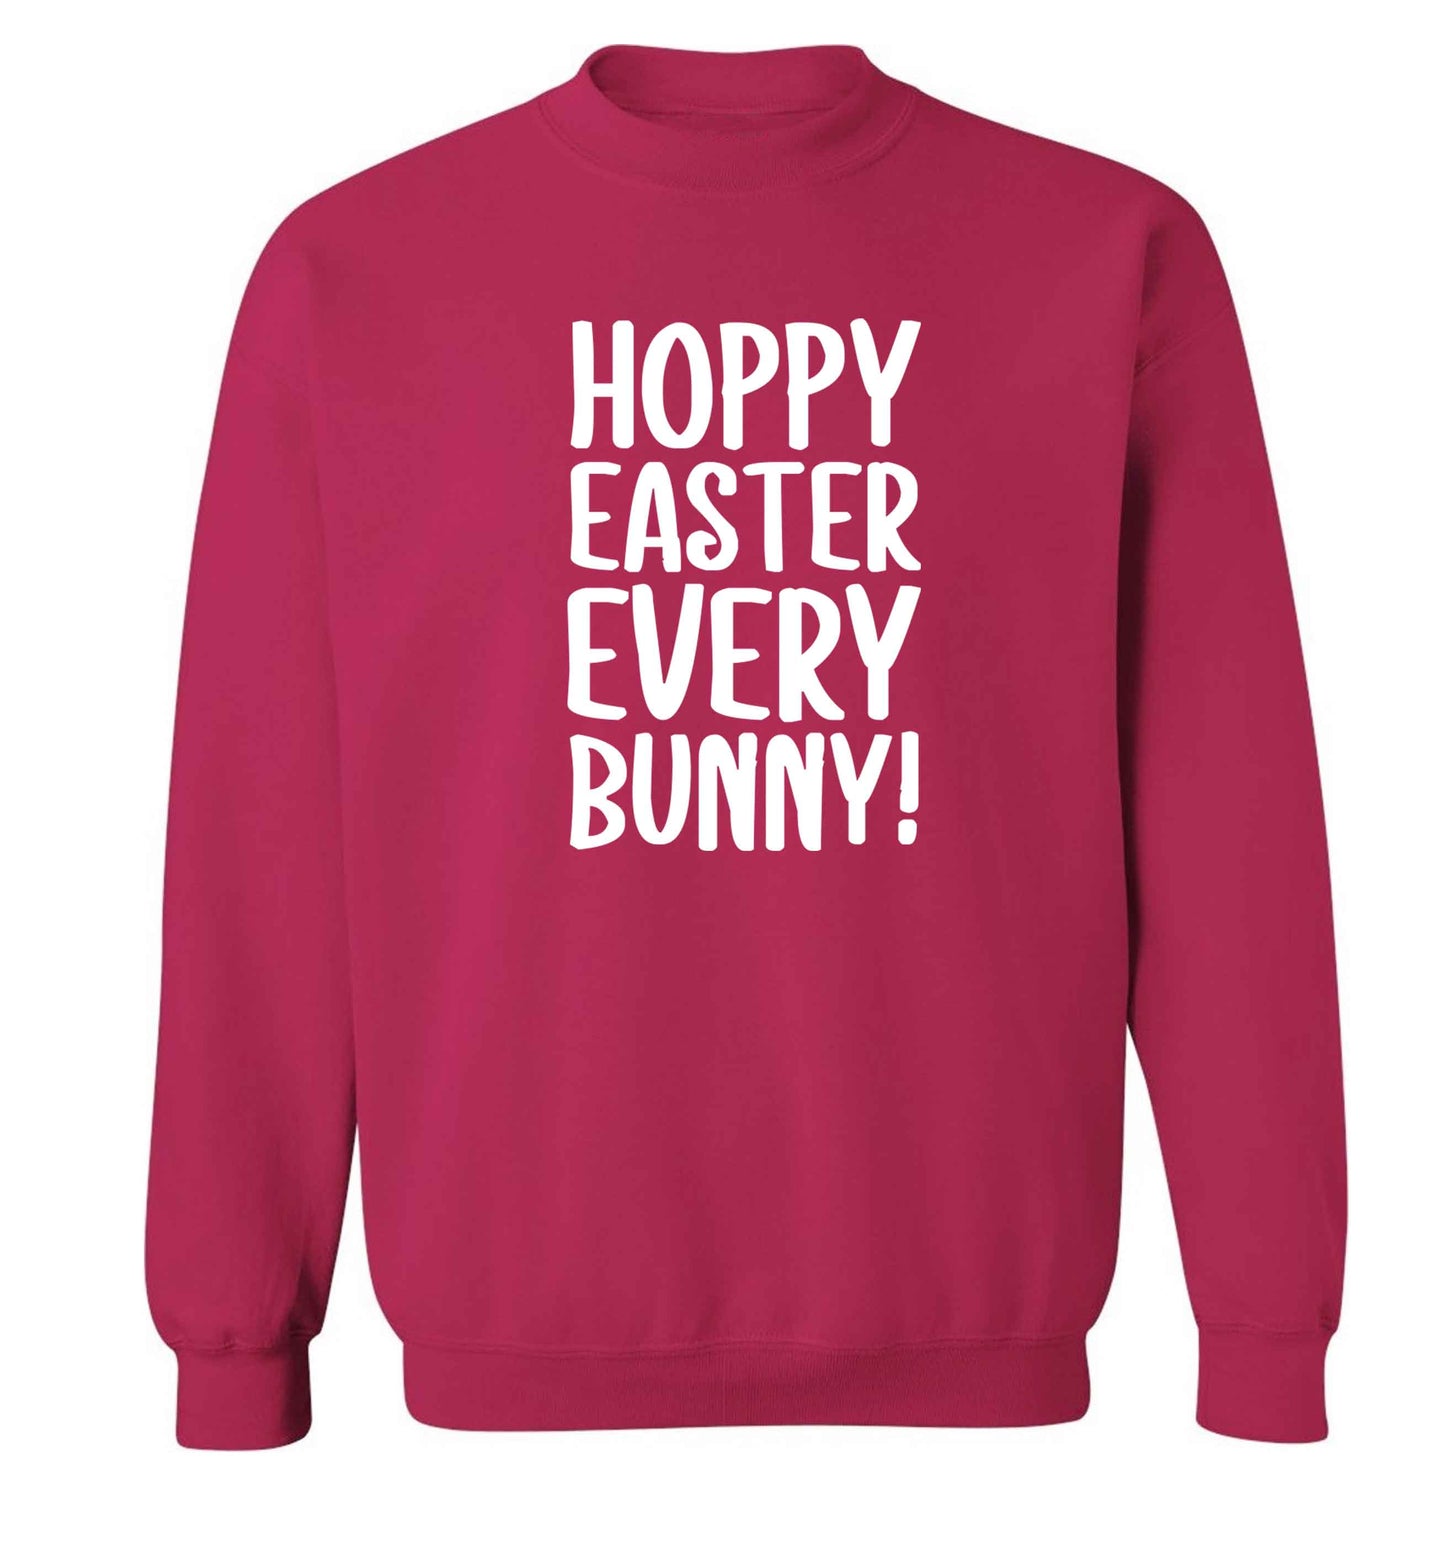 Hoppy Easter every bunny! adult's unisex pink sweater 2XL